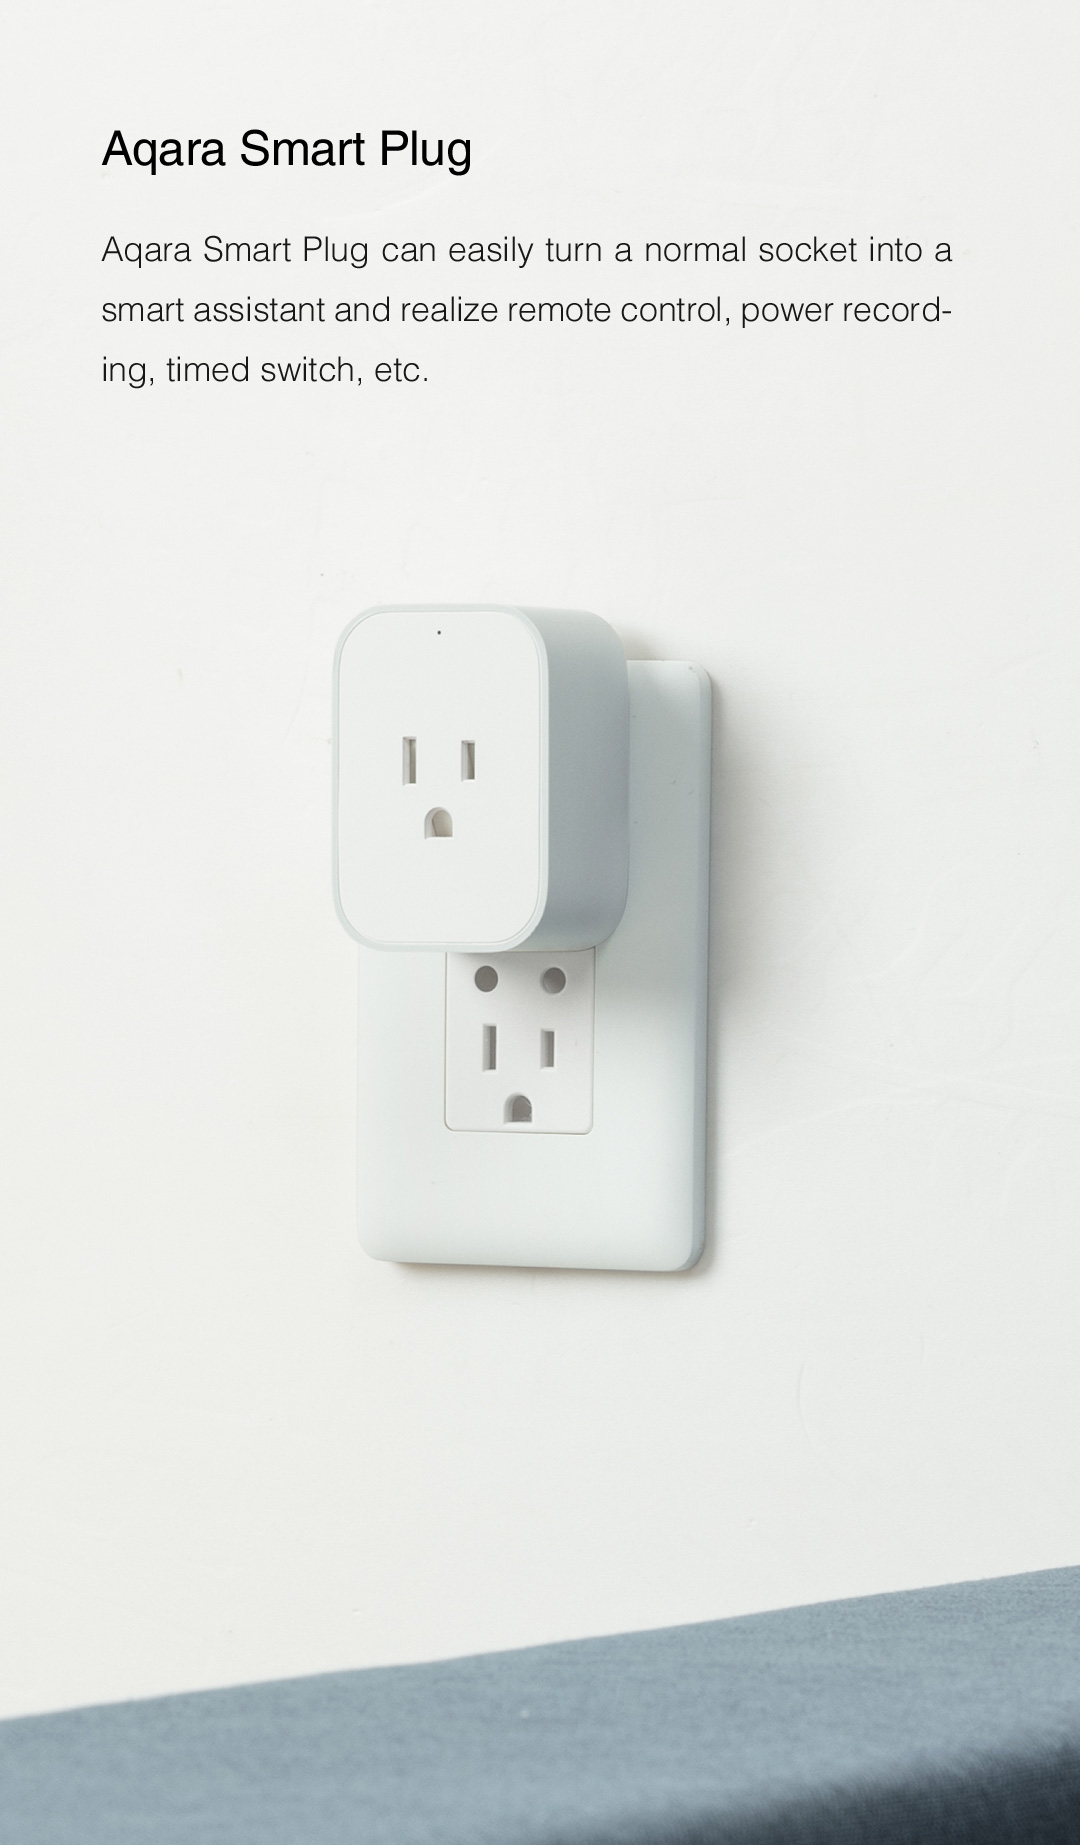 Aqara smart outlet - easily turn a normal socket into a smart assistant